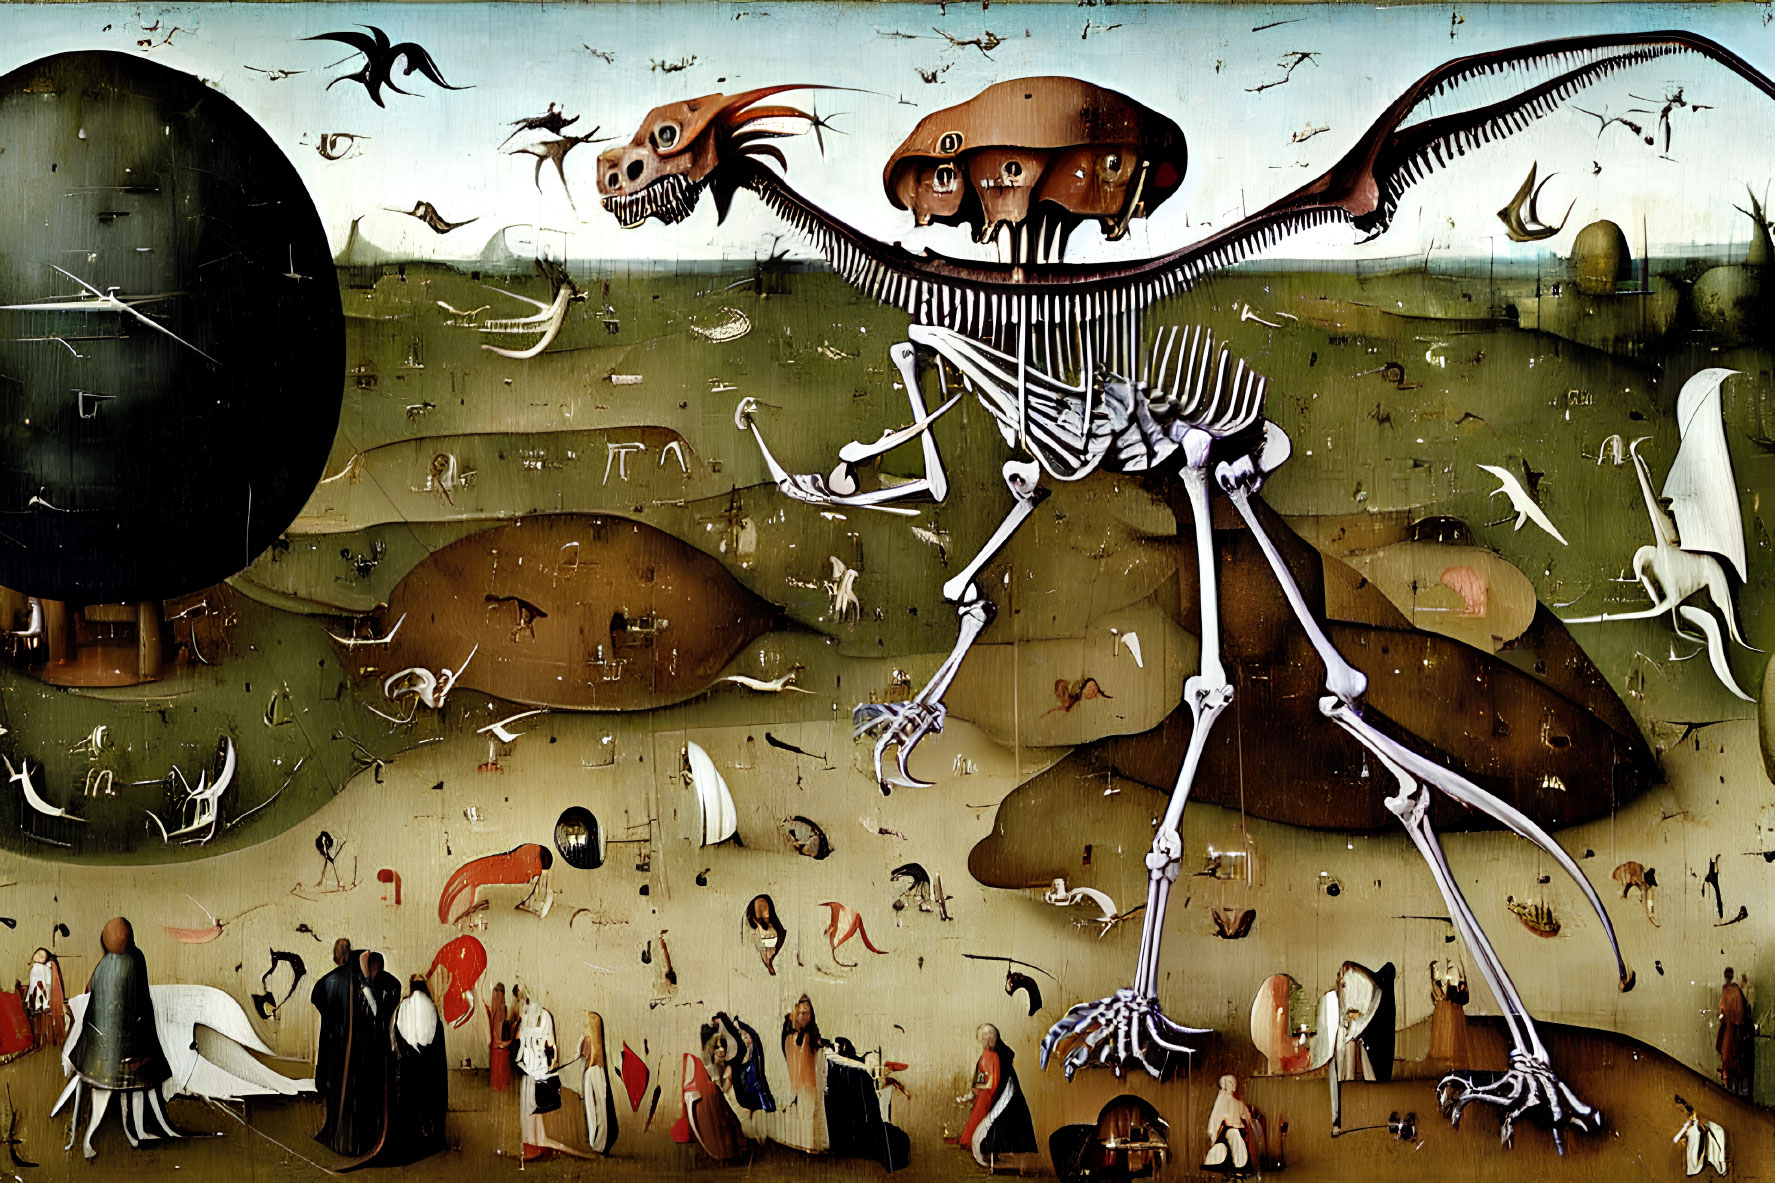 Skeletal creature in surreal painting with chaotic scenes